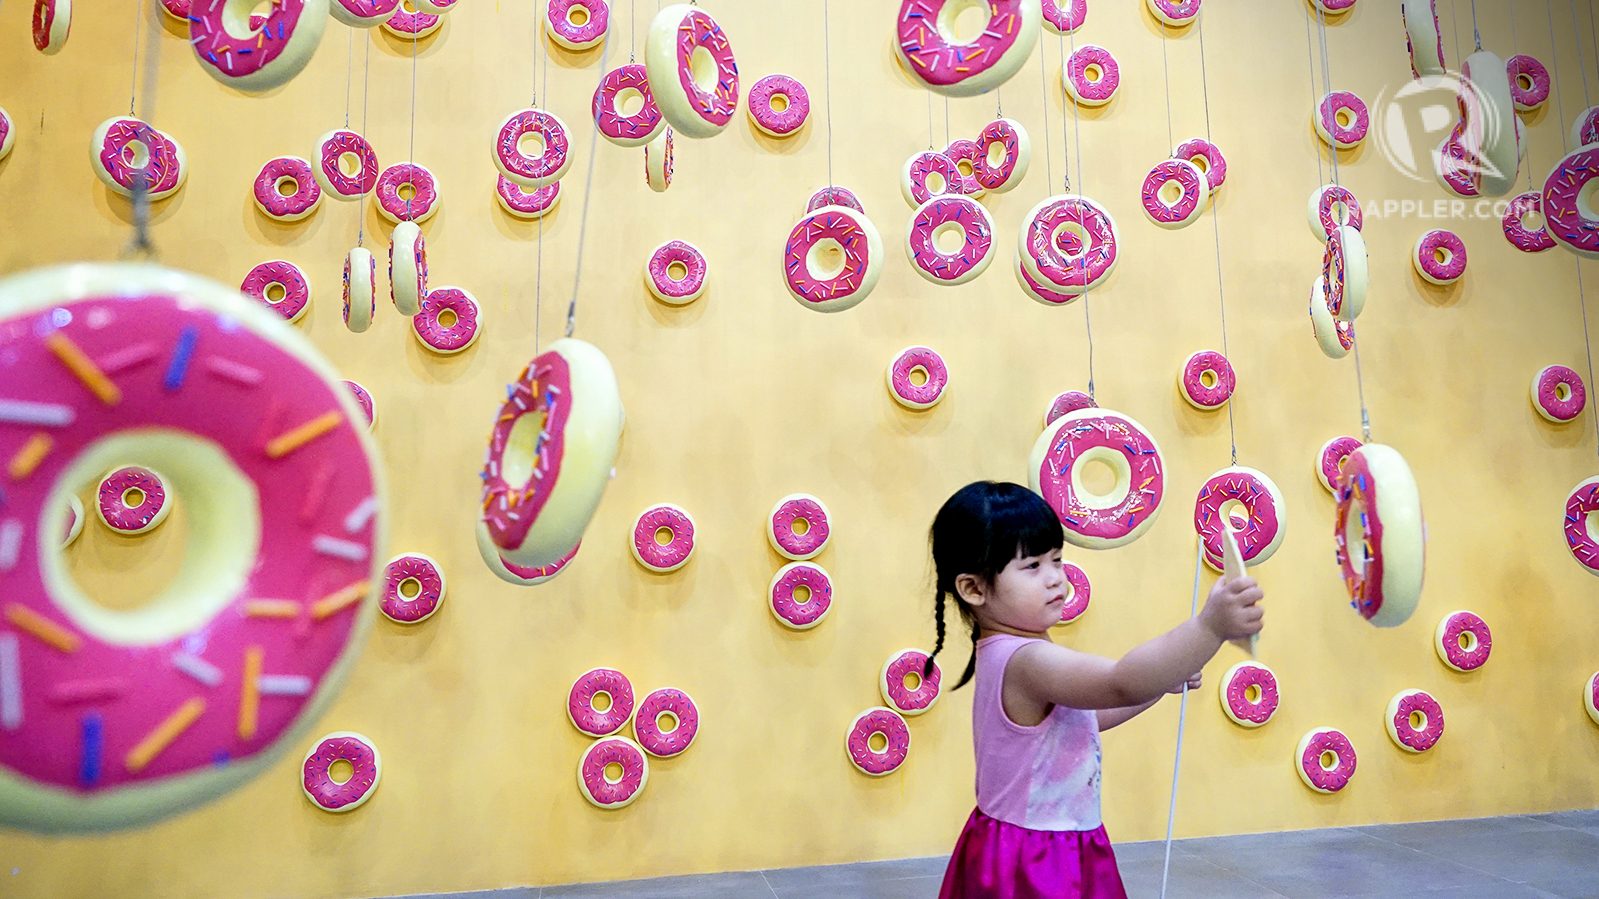 IN PHOTOS: The Dessert Museum is what sweet dreams are made of